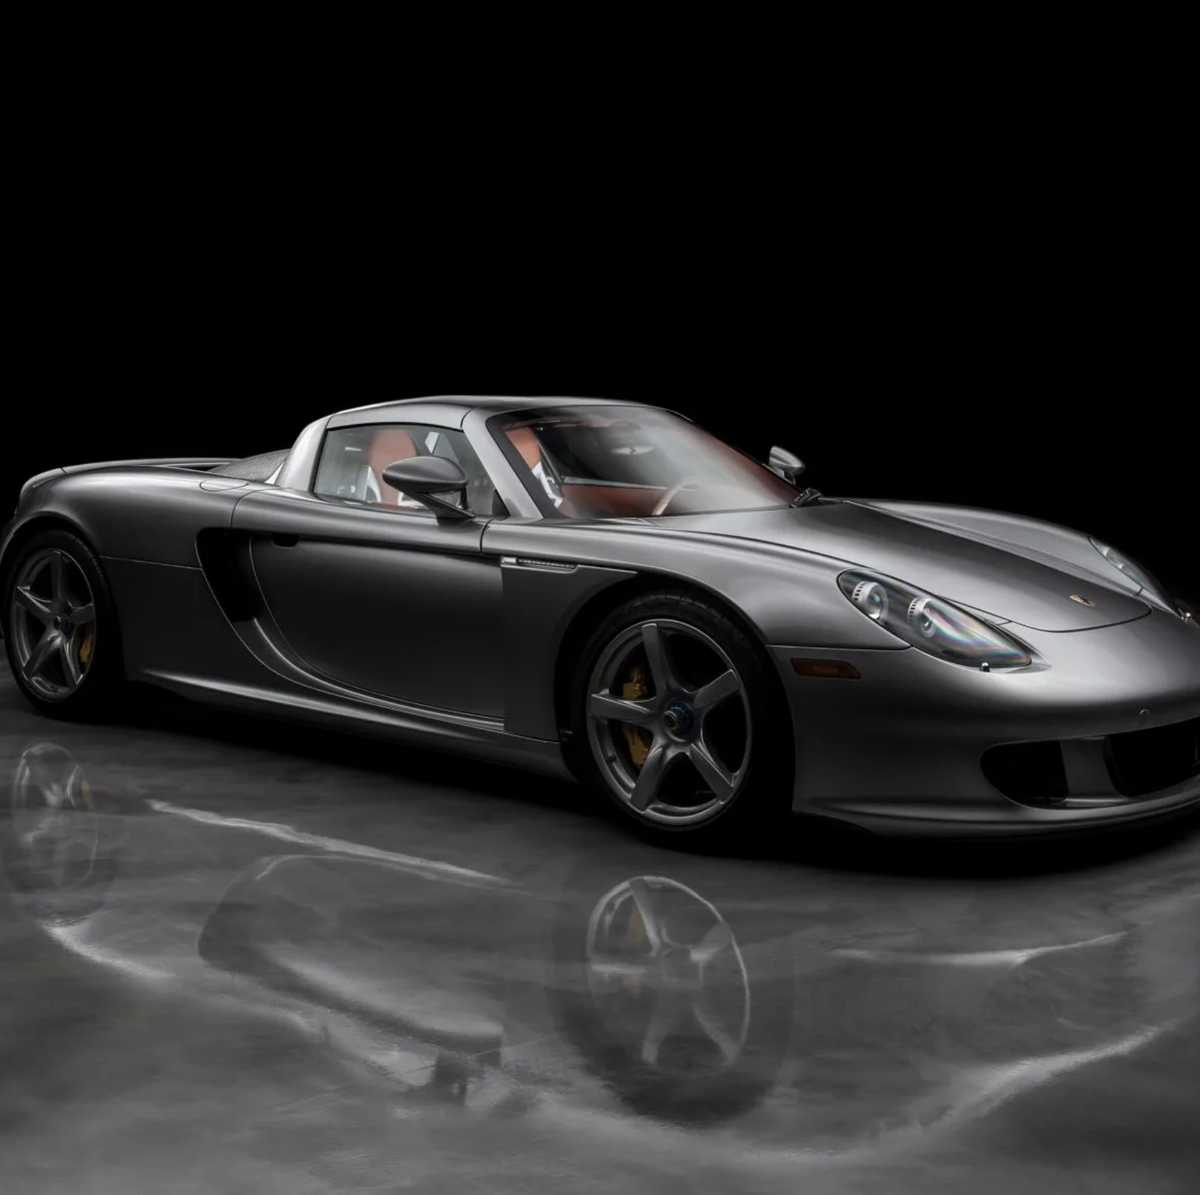 Another Porsche Carrera GT Is the New Top BaT Sale at $2m